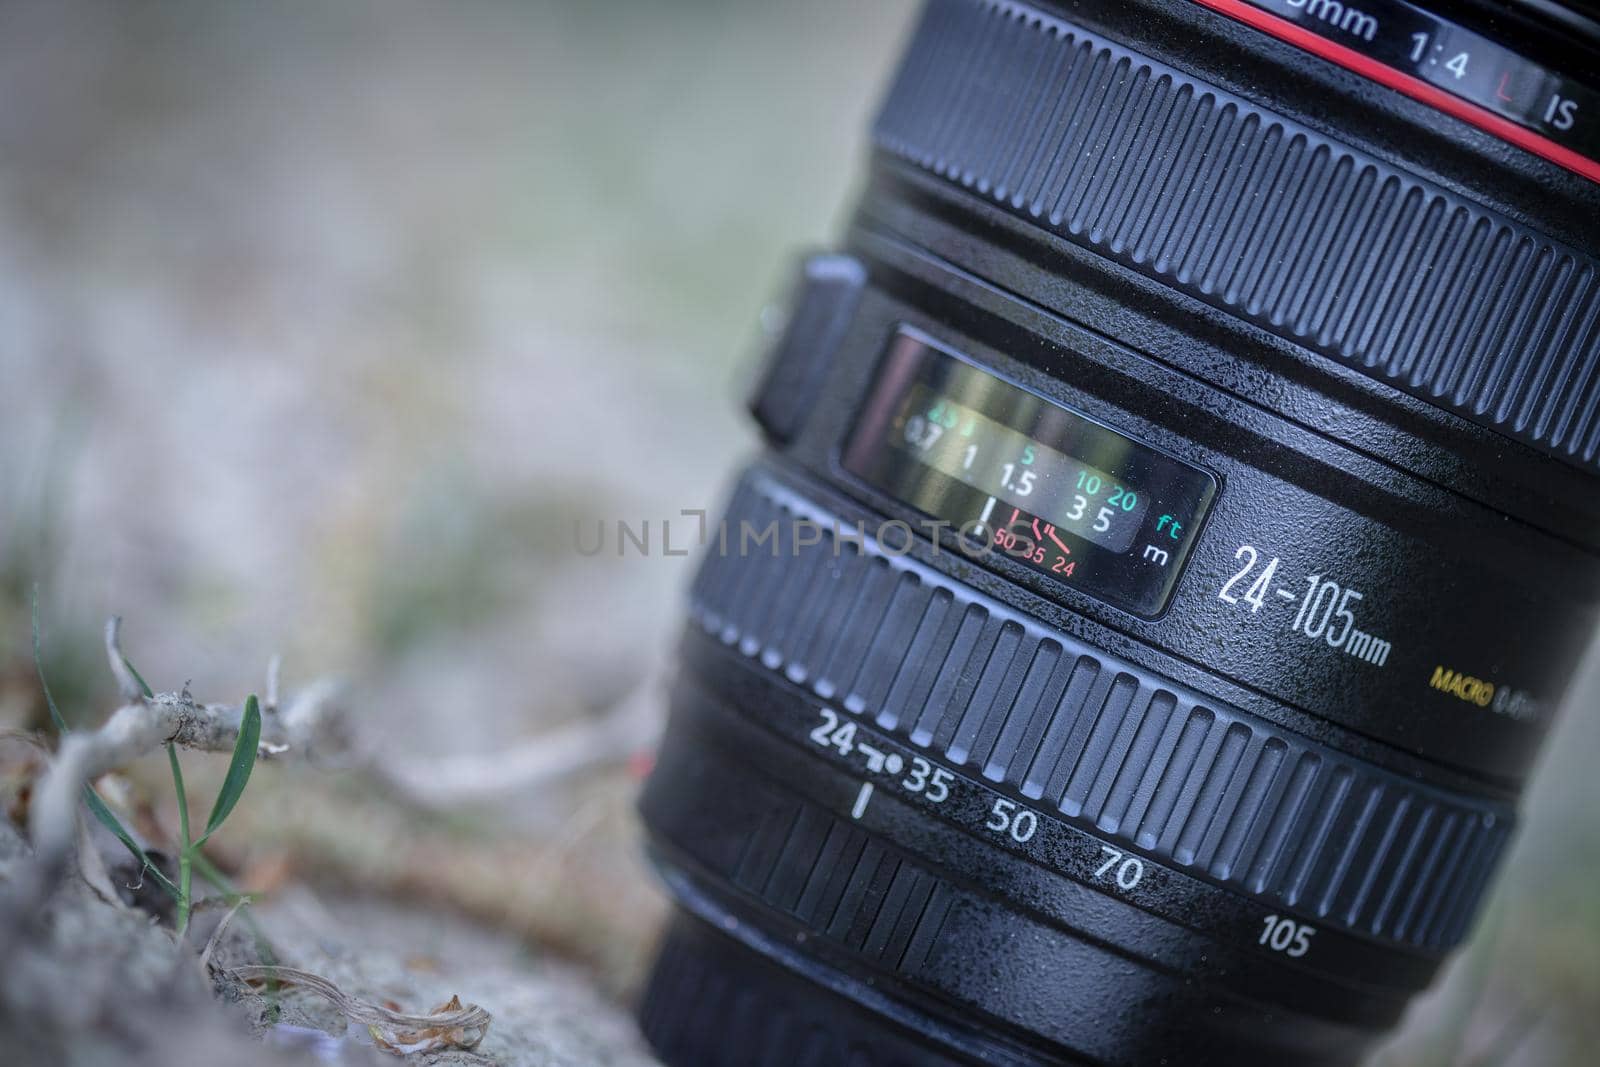 Professional optic photo lens outdoors. Warm colors, blurry background. by Daxenbichler